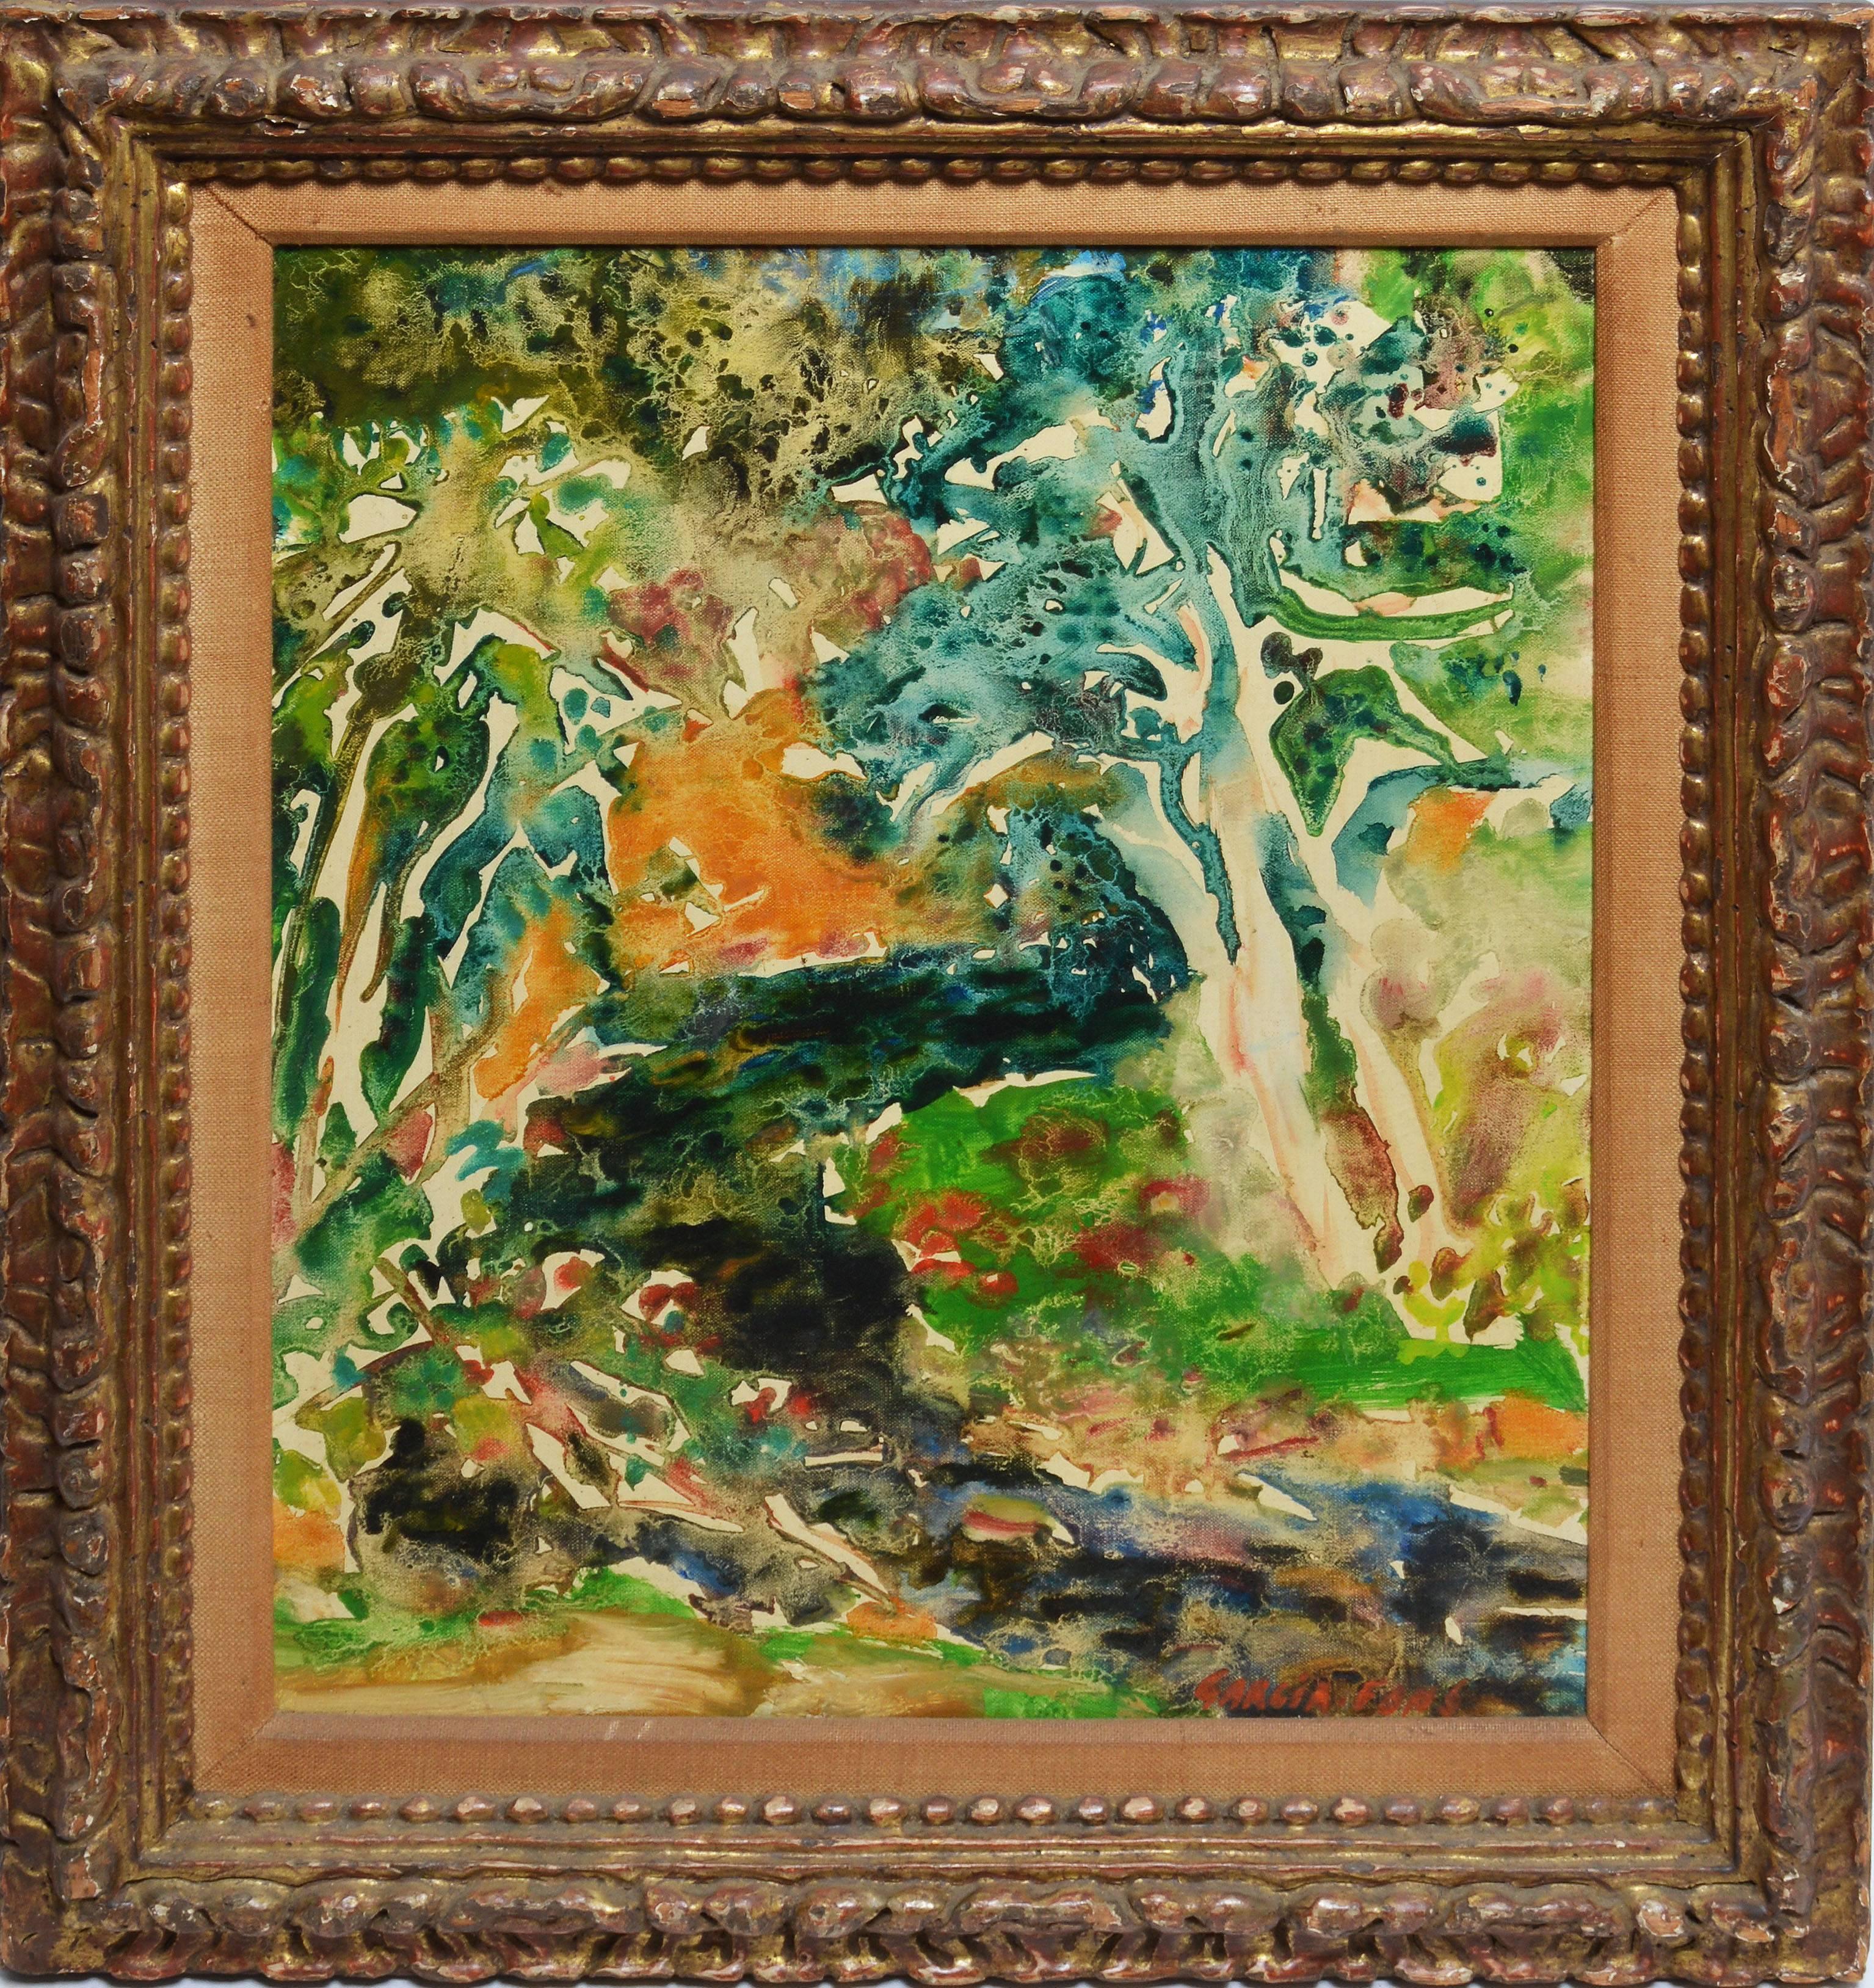 Modernist Landscape by Pierre Garcia Fons (b.1928). Oil on canvas, circa 1965. Signed lower right, "Garcia Fons". Displayed in a period modernist frame. Image size, 13"L x 16"H, overall 18"L x 21"H.
